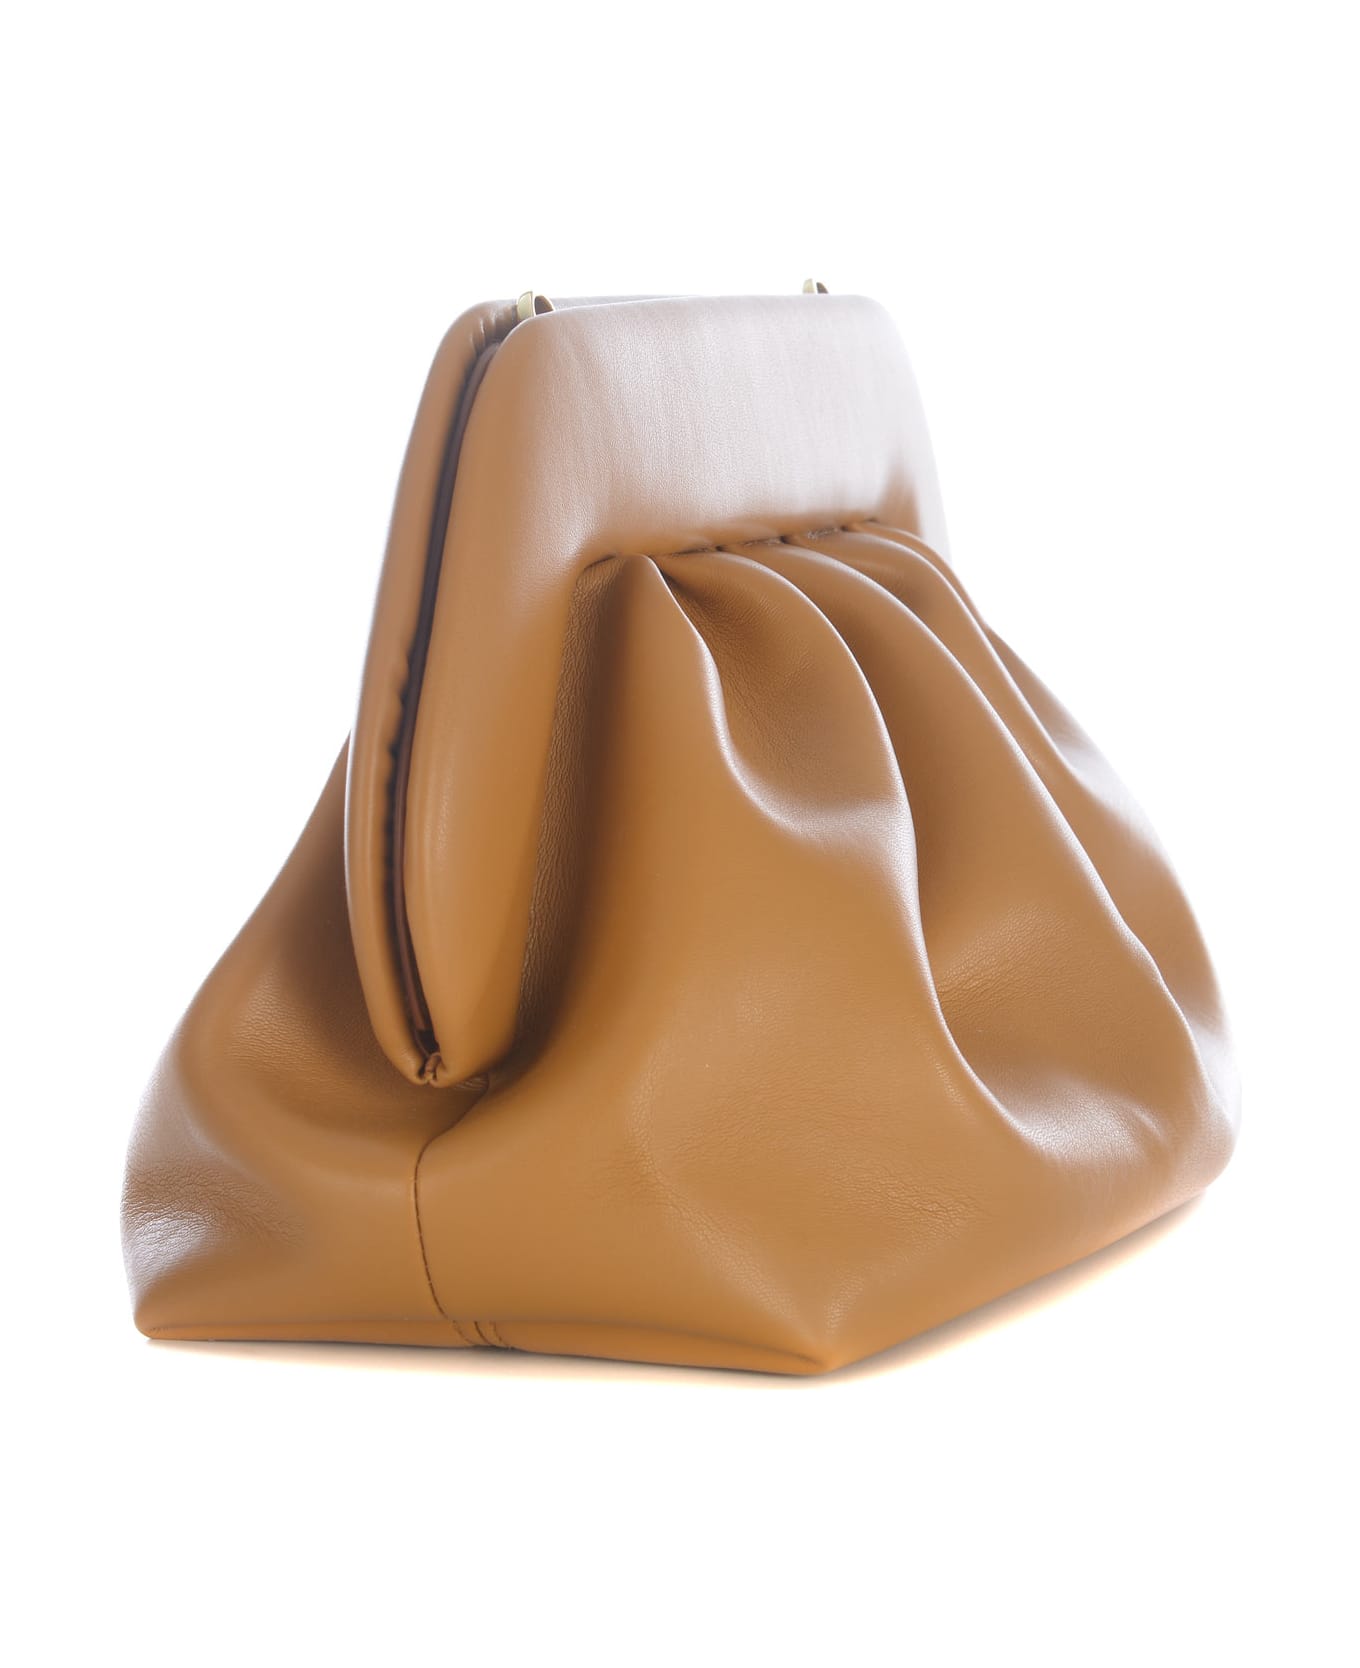 THEMOIRè Bag Themoiré "bios" In Faux Leather - Cappuccino クラッチバッグ